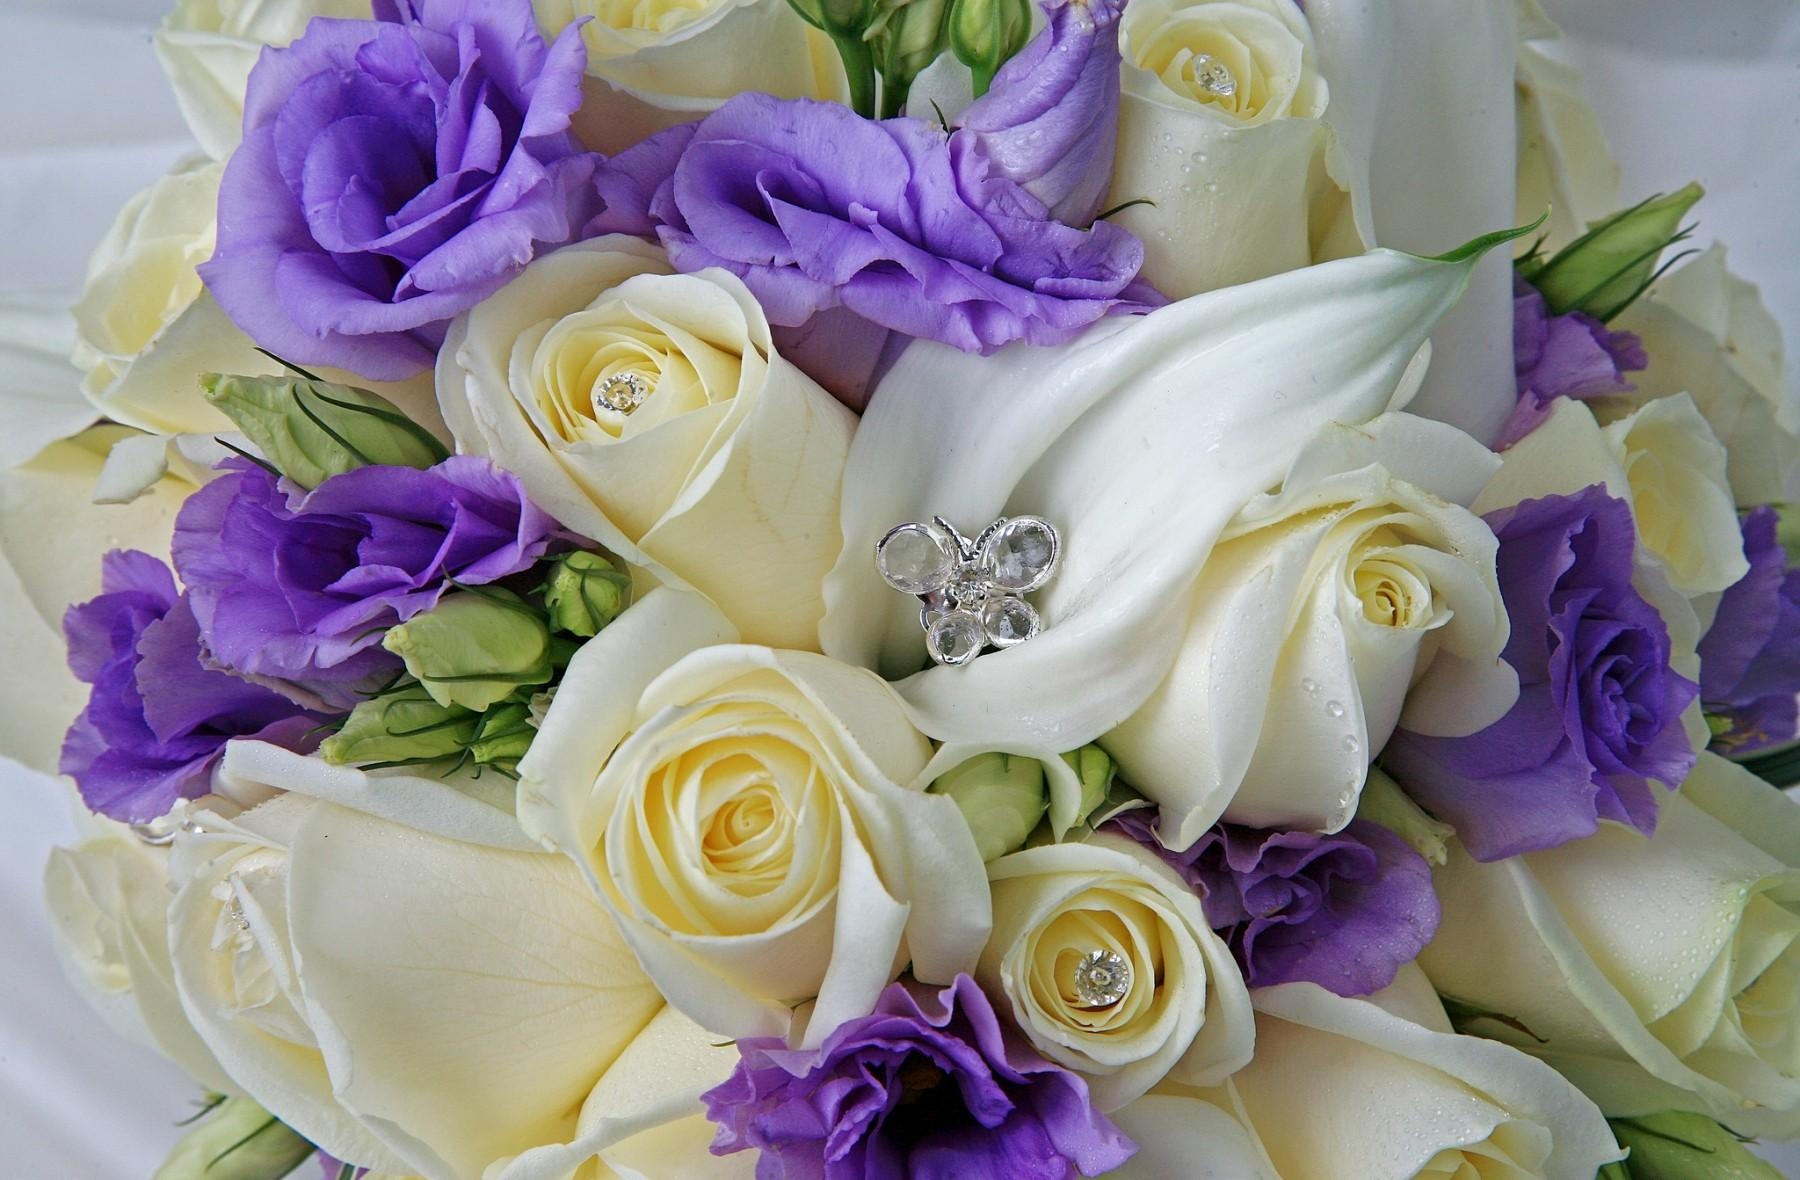 drops, roses, flowers, decorations, bouquet, lisianthus russell, lisiantus russell 32K